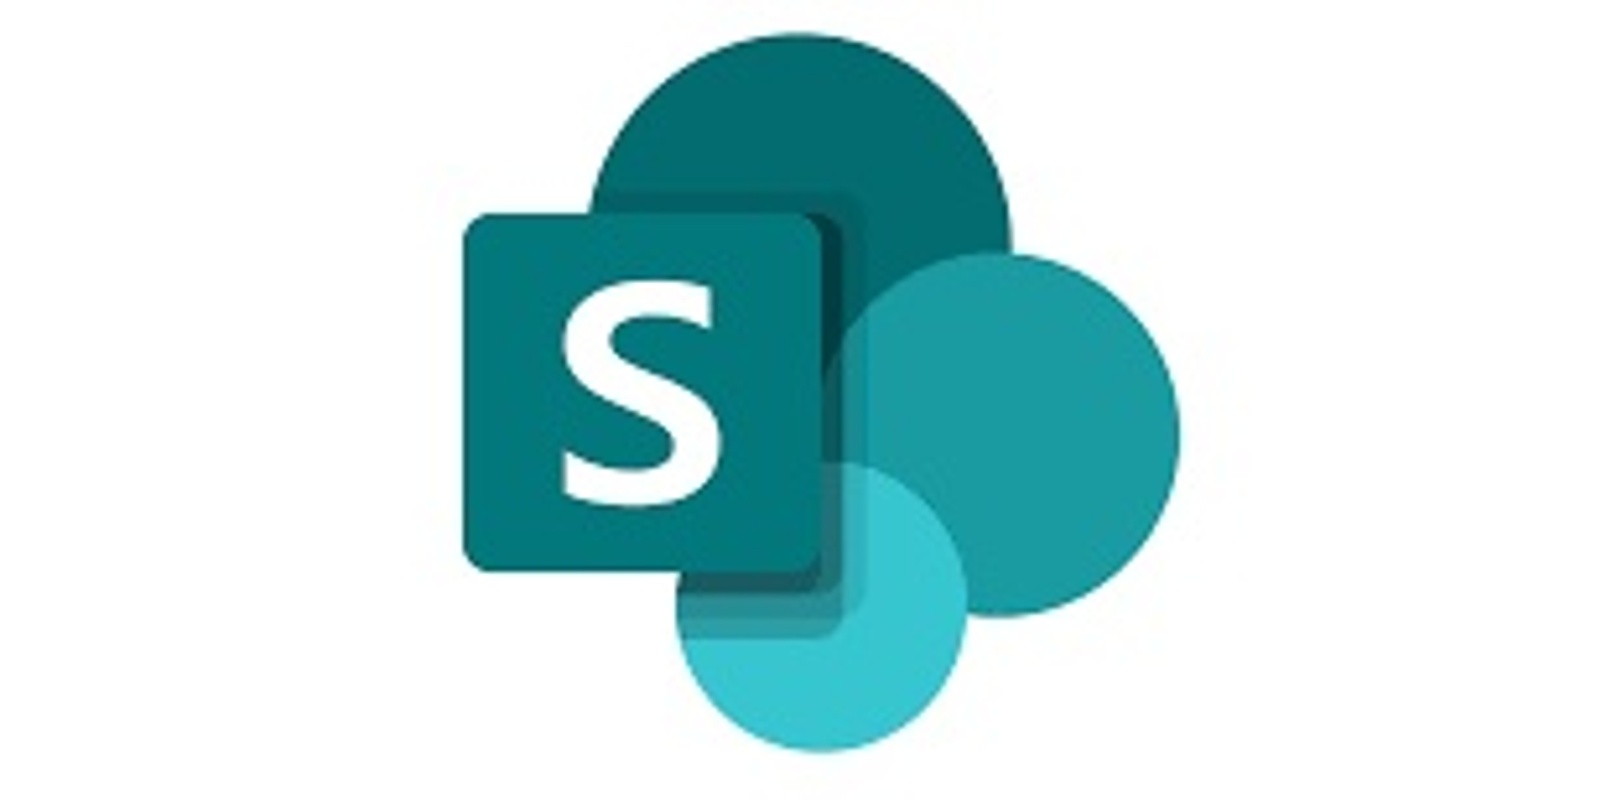 SharePoint Online/2019 for End Users, Online Training Course